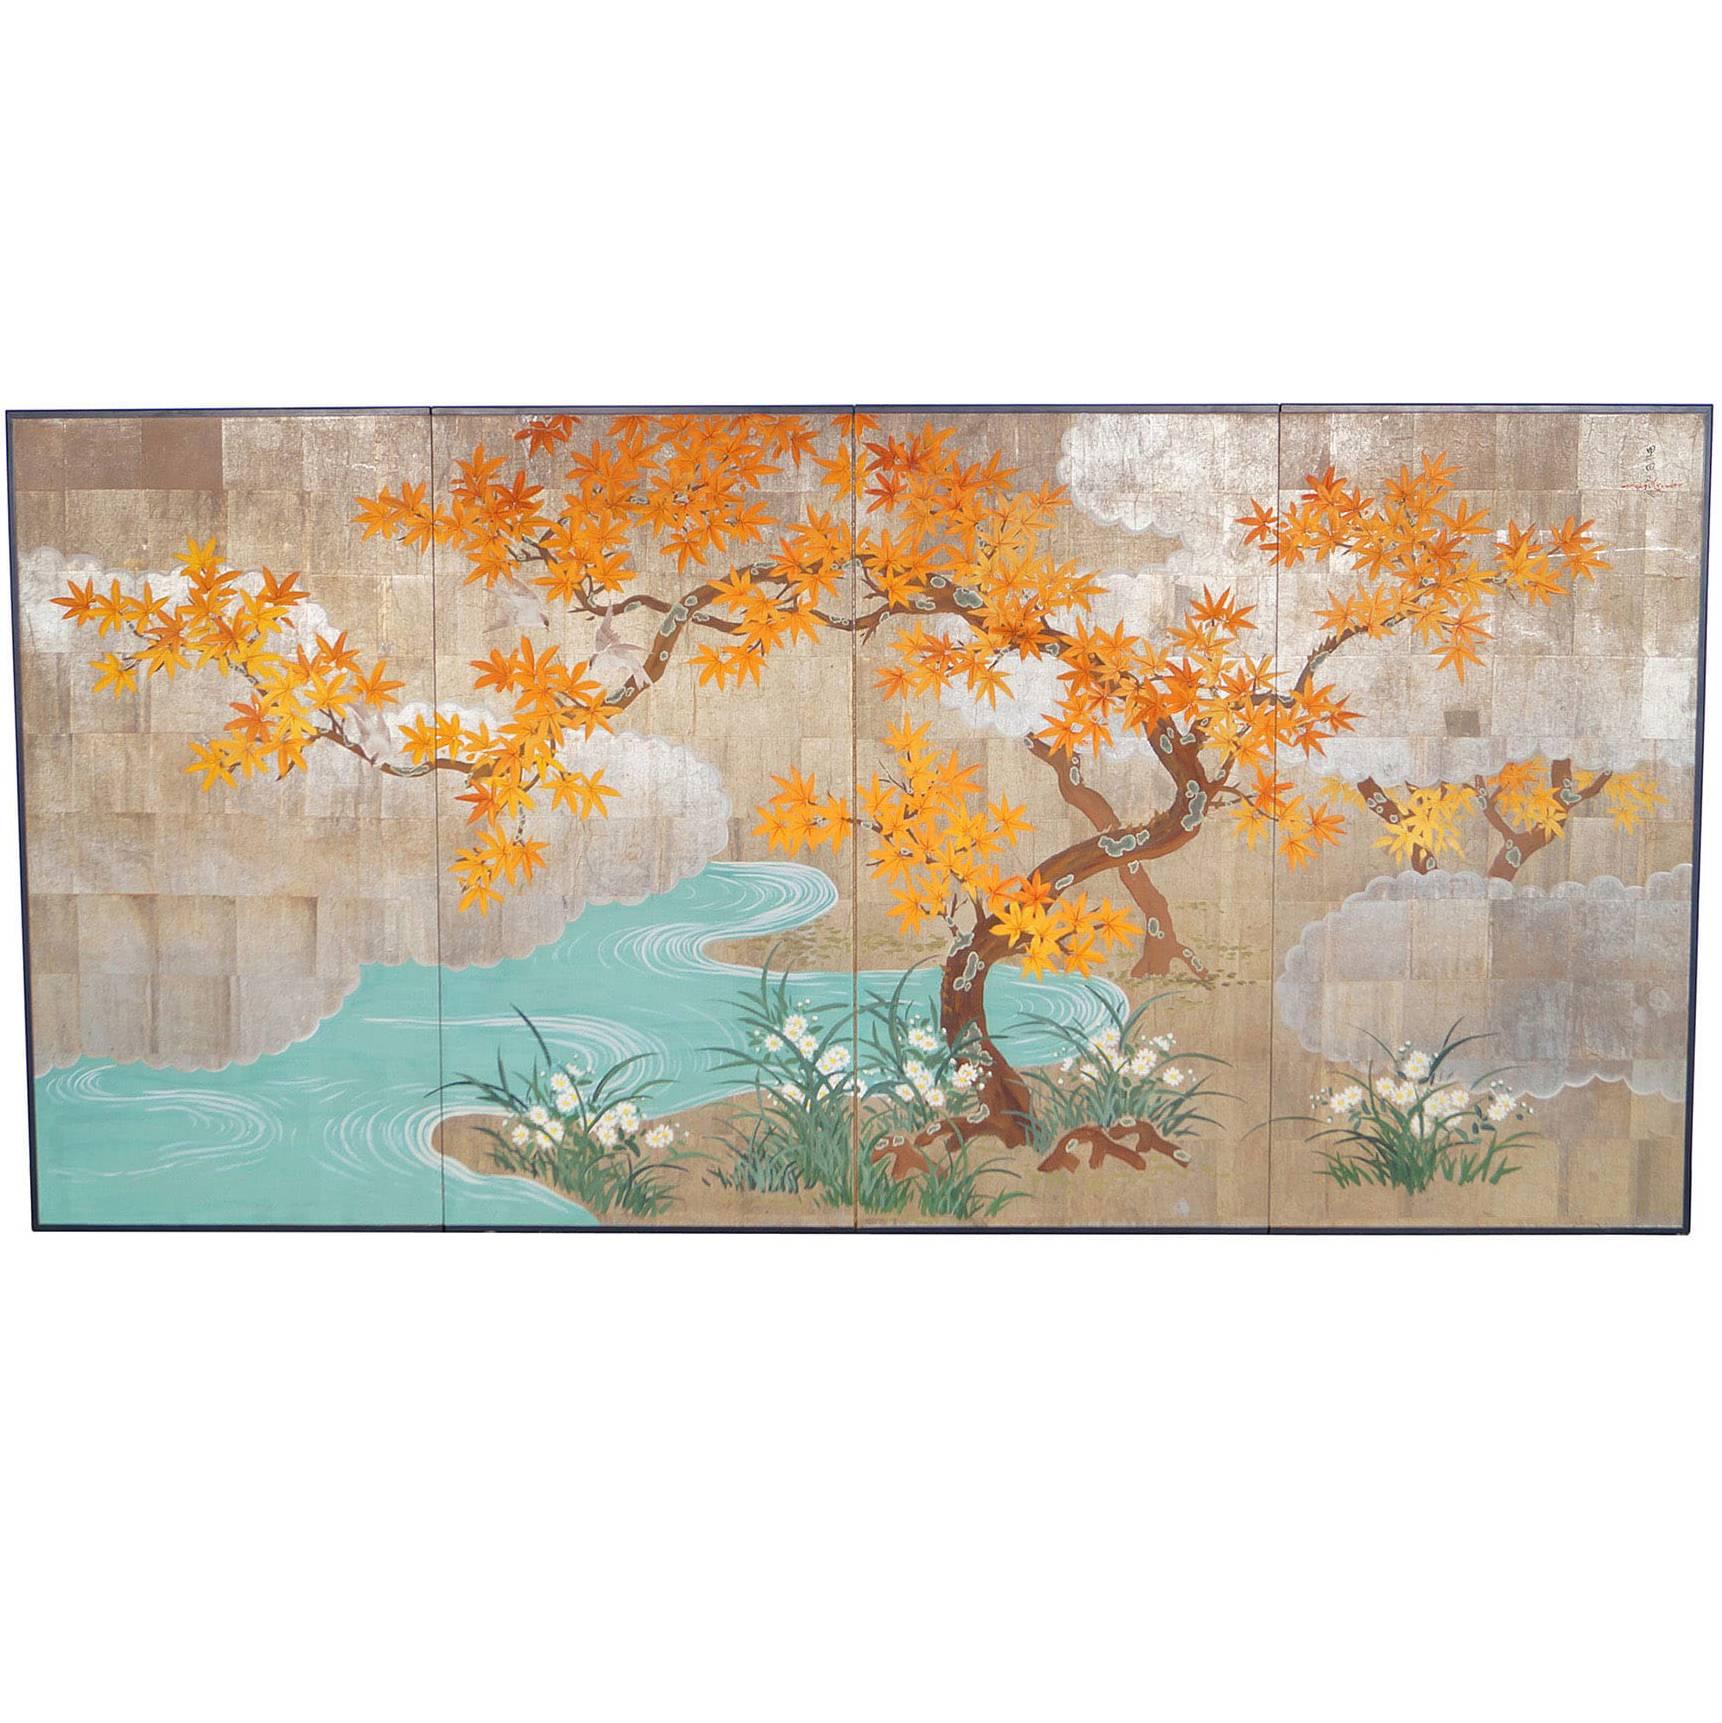 Vintage Hand-Painted Screen Panels by Robert Crowder 